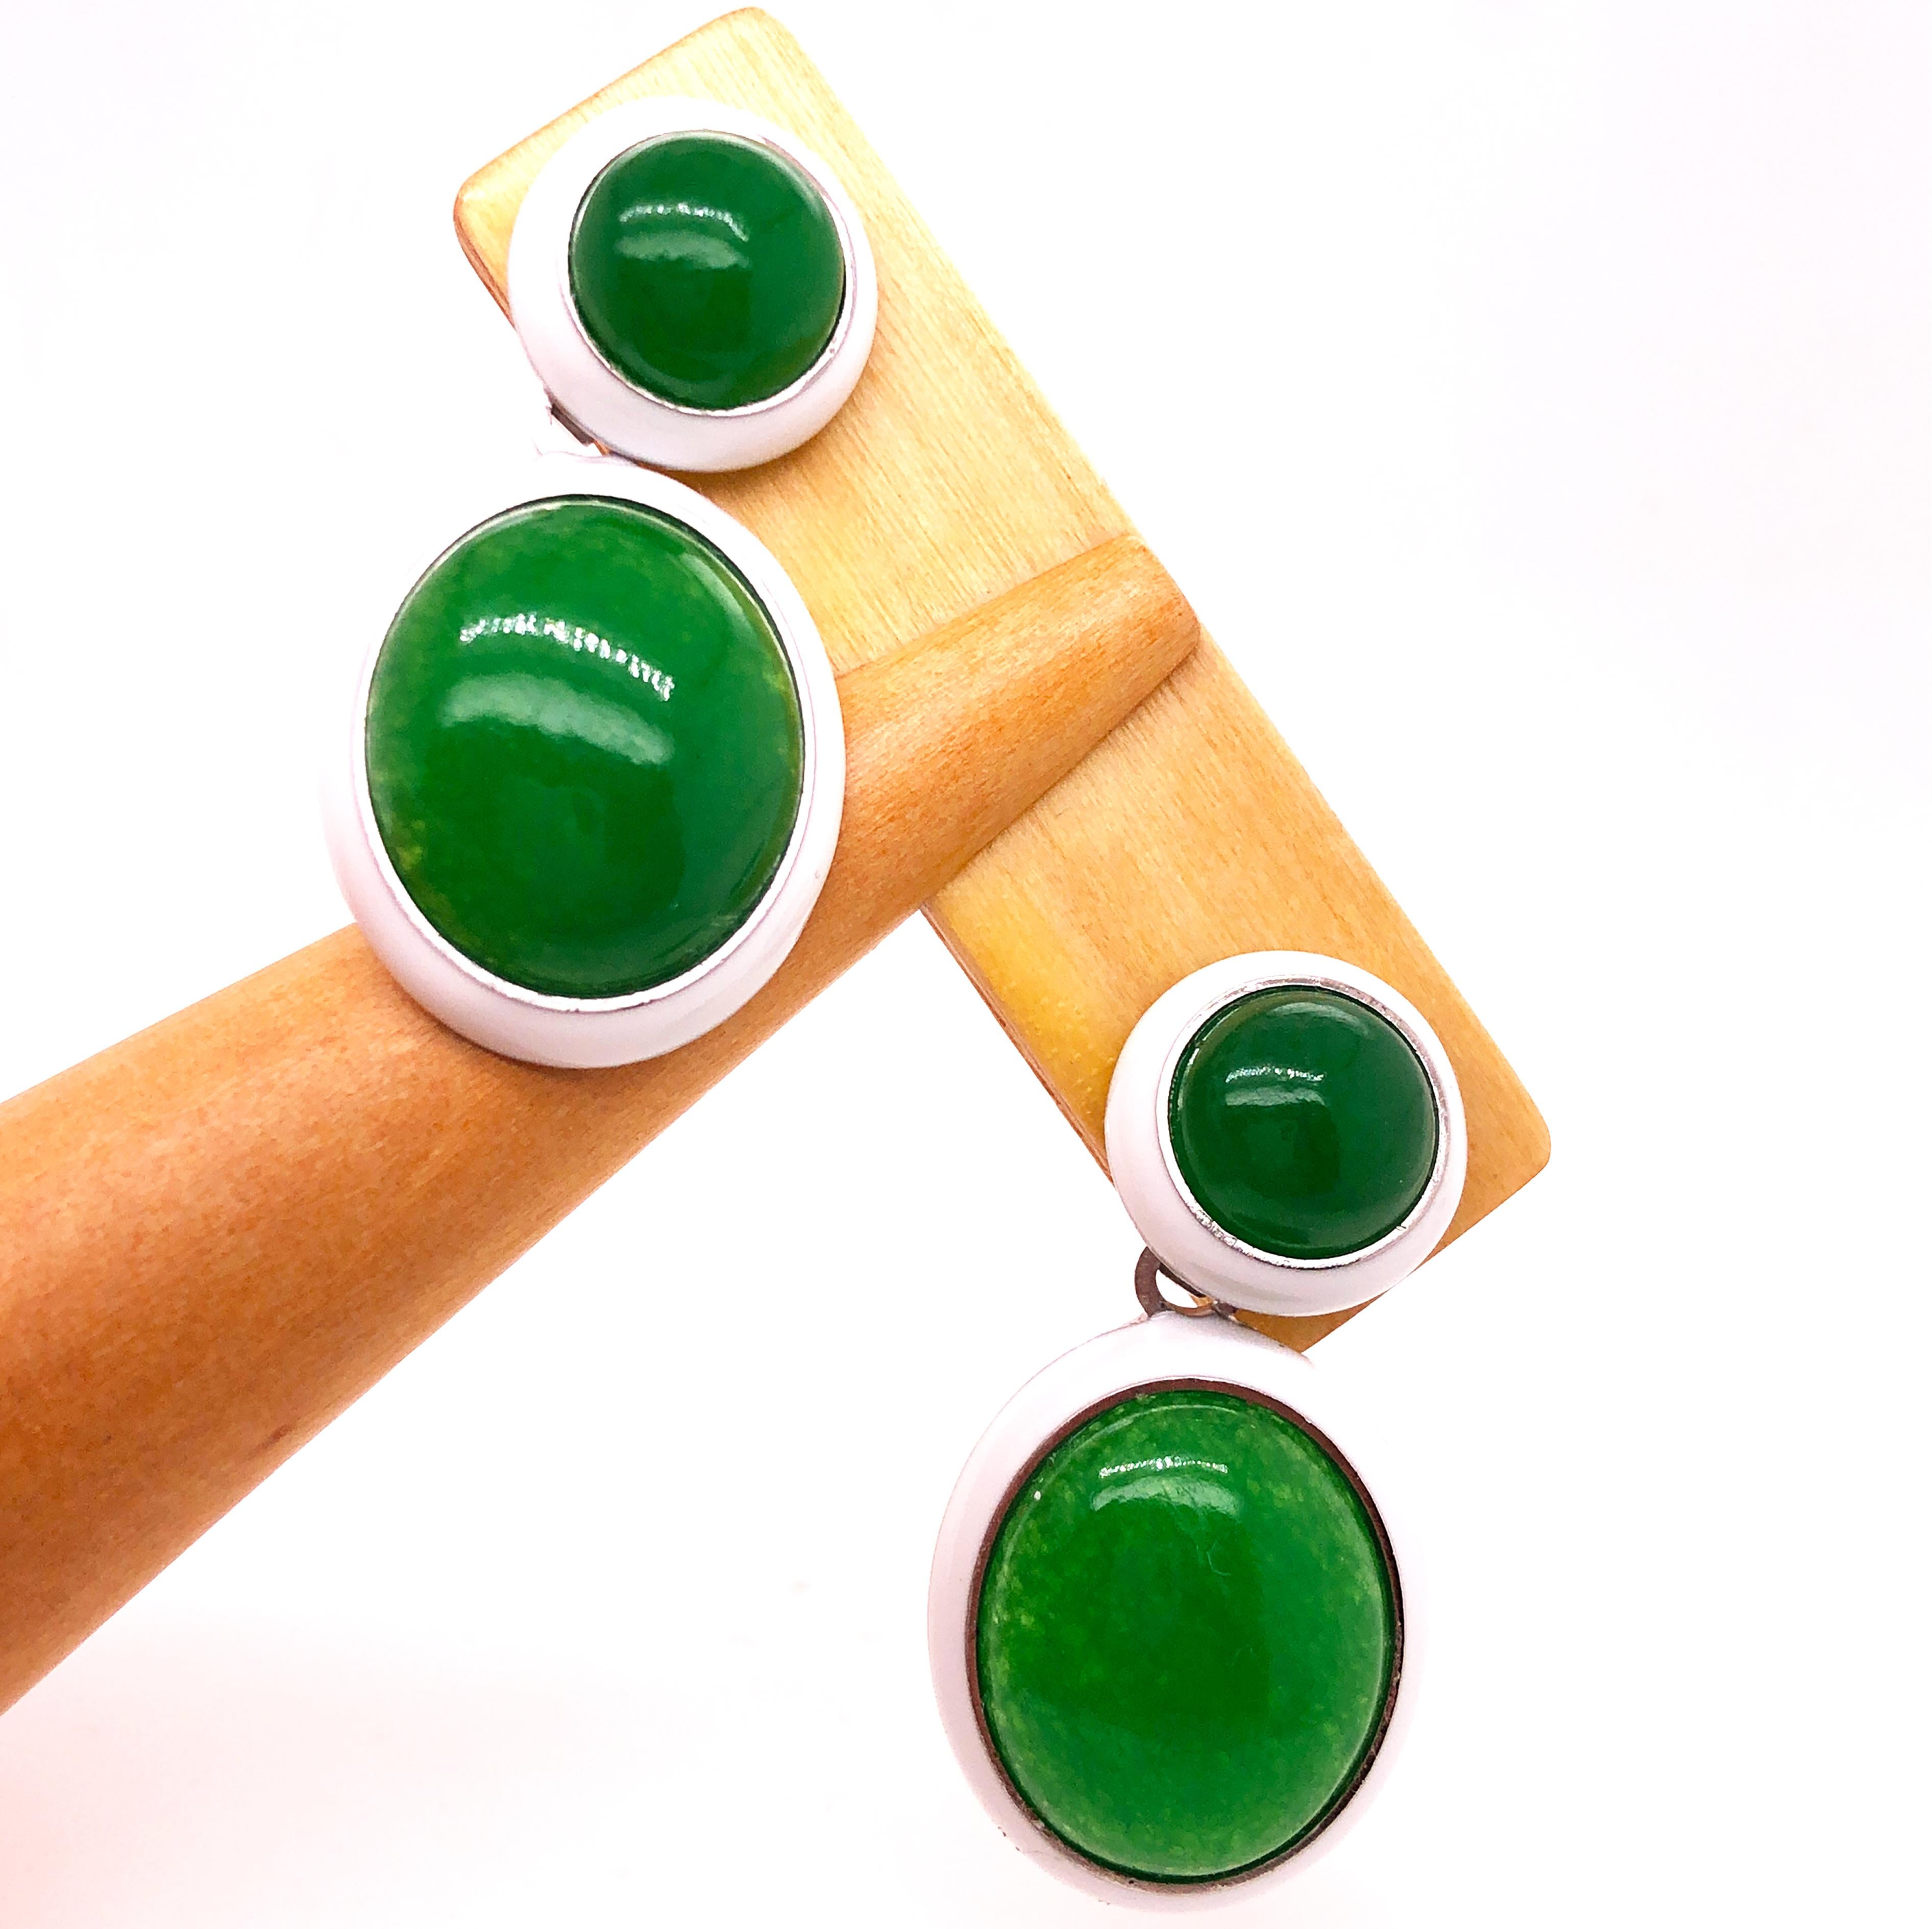 One-of-a-kind Contemporary Chic Earrings Featuring  44.8 Carat Natural Green Jade Cabochons  in a pure White Hand Enameled Sterling Silver Setting.
The color-changing of the Green Jade's cabochon combined with White Hand Enameled Sterling Silver